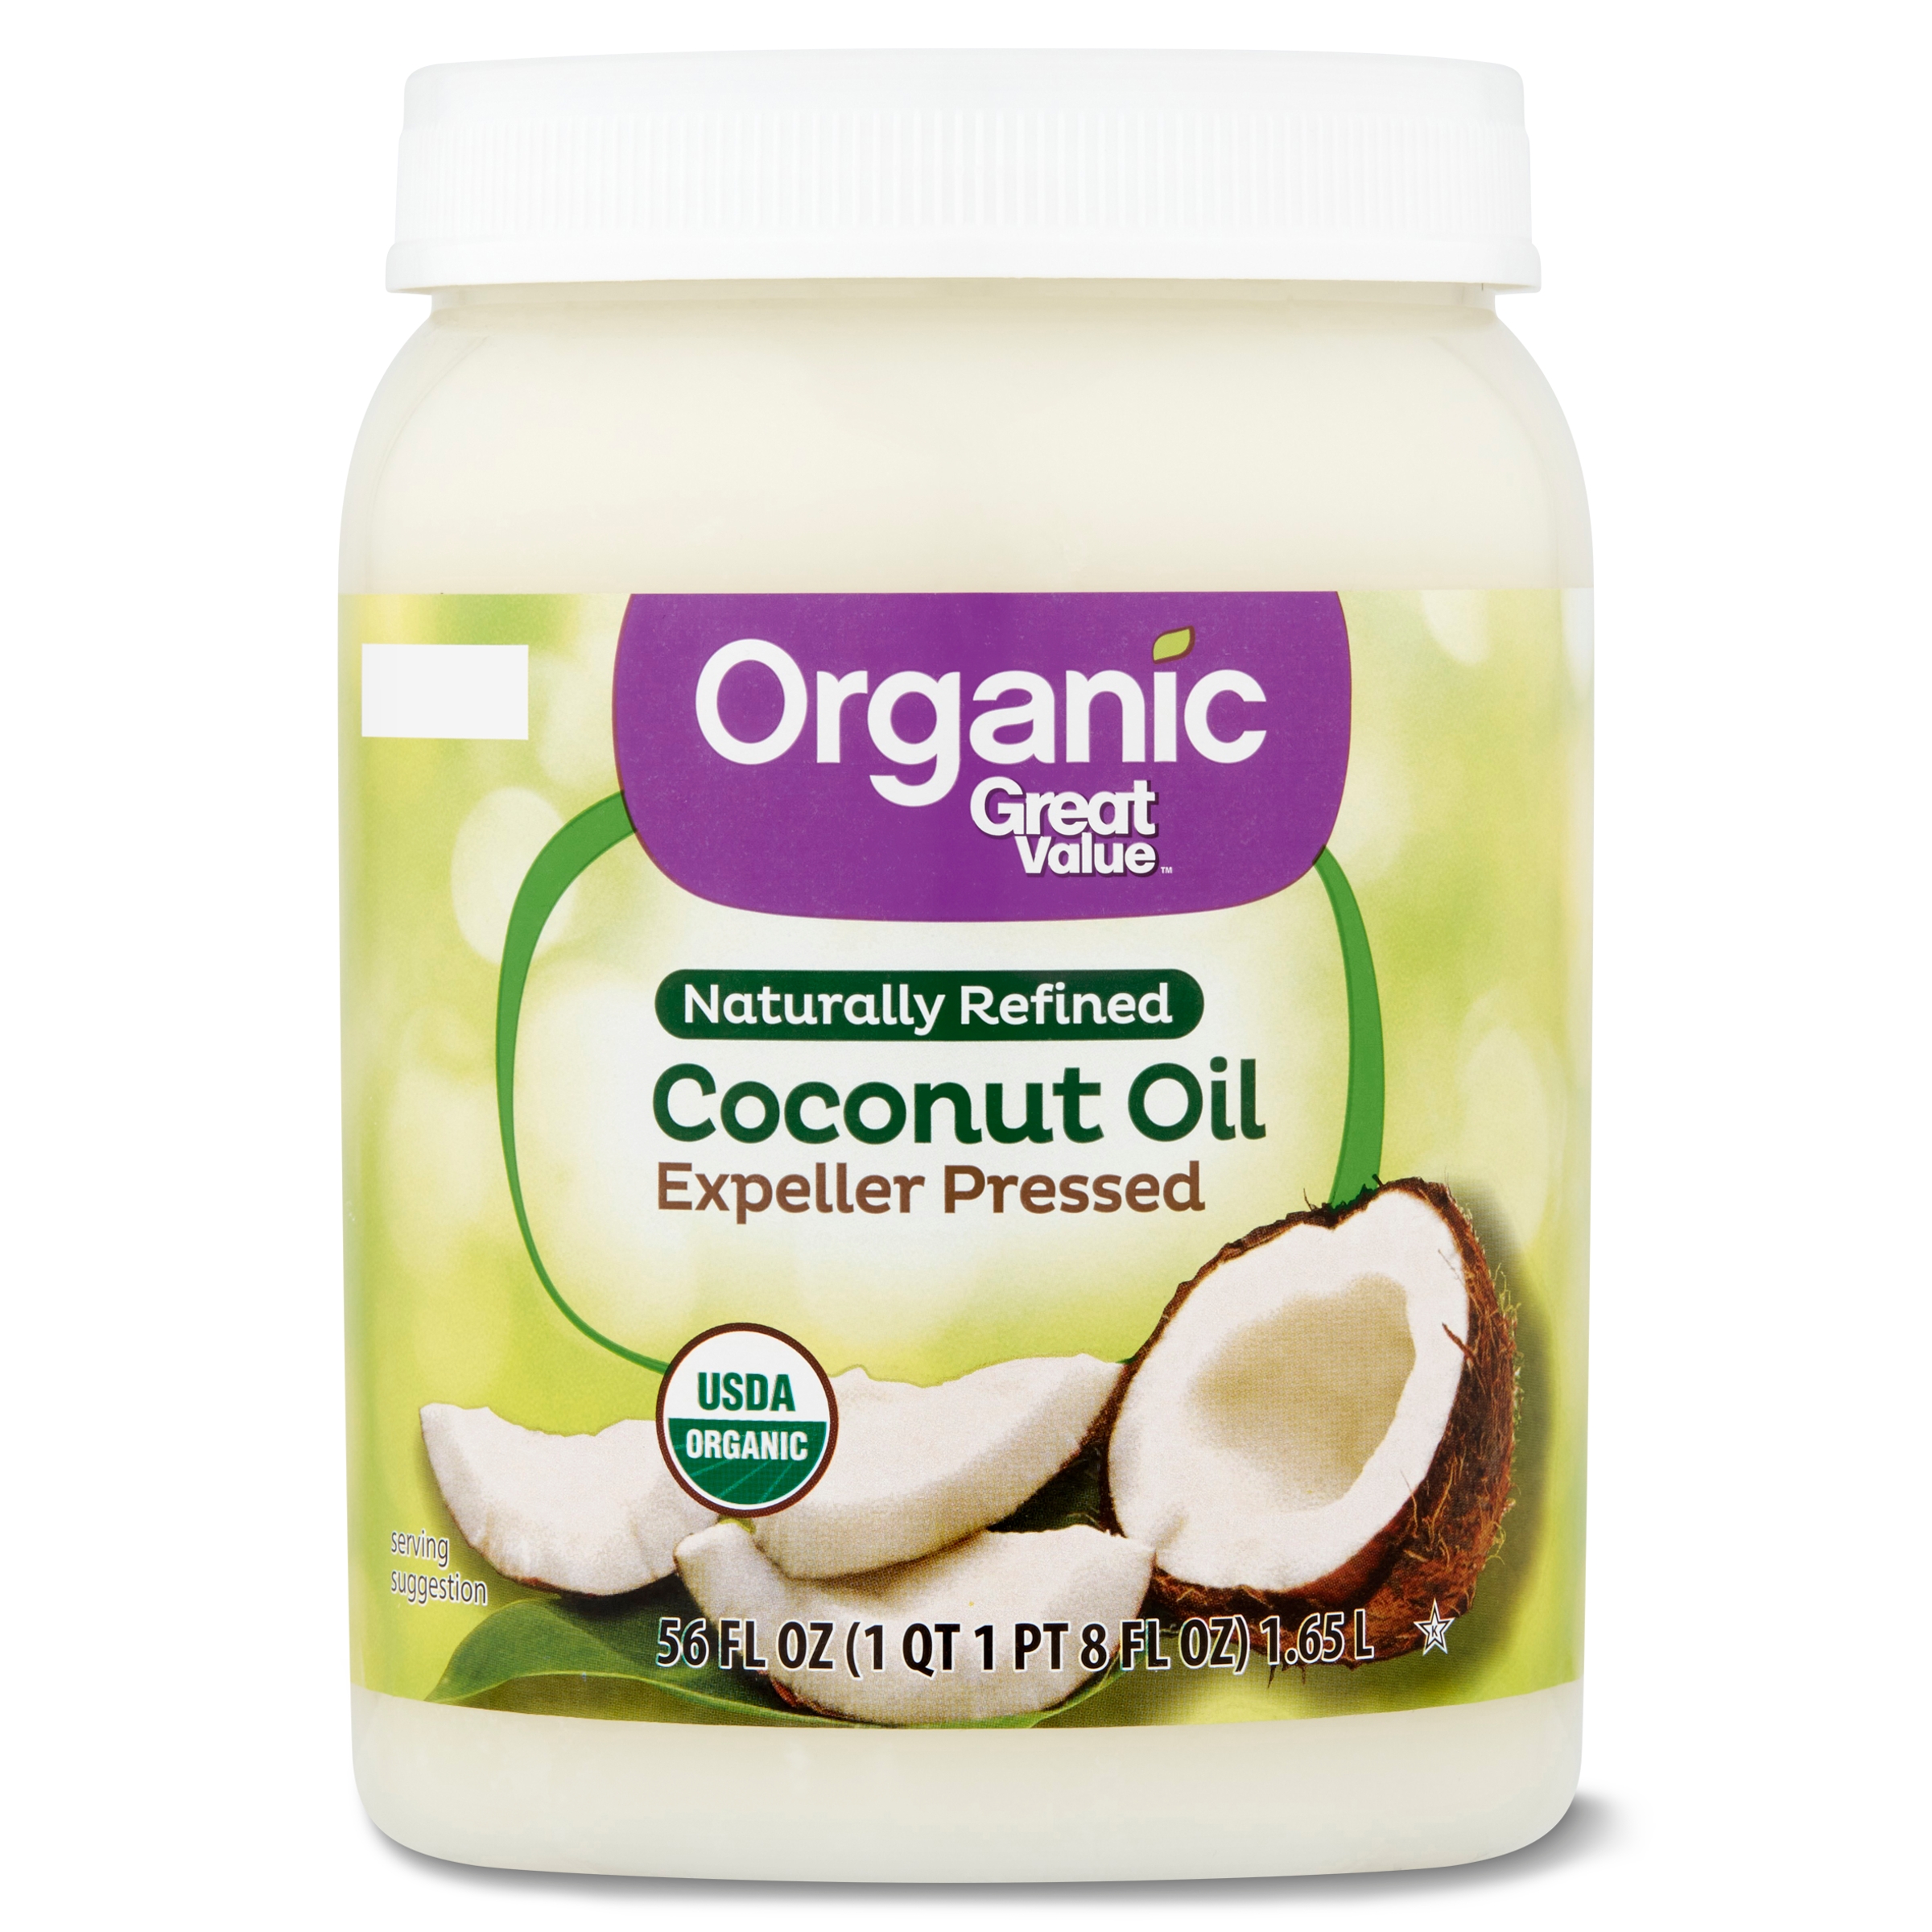 Great Value Organic Naturally Refined Coconut Oil, 56 fl oz - image 1 of 7